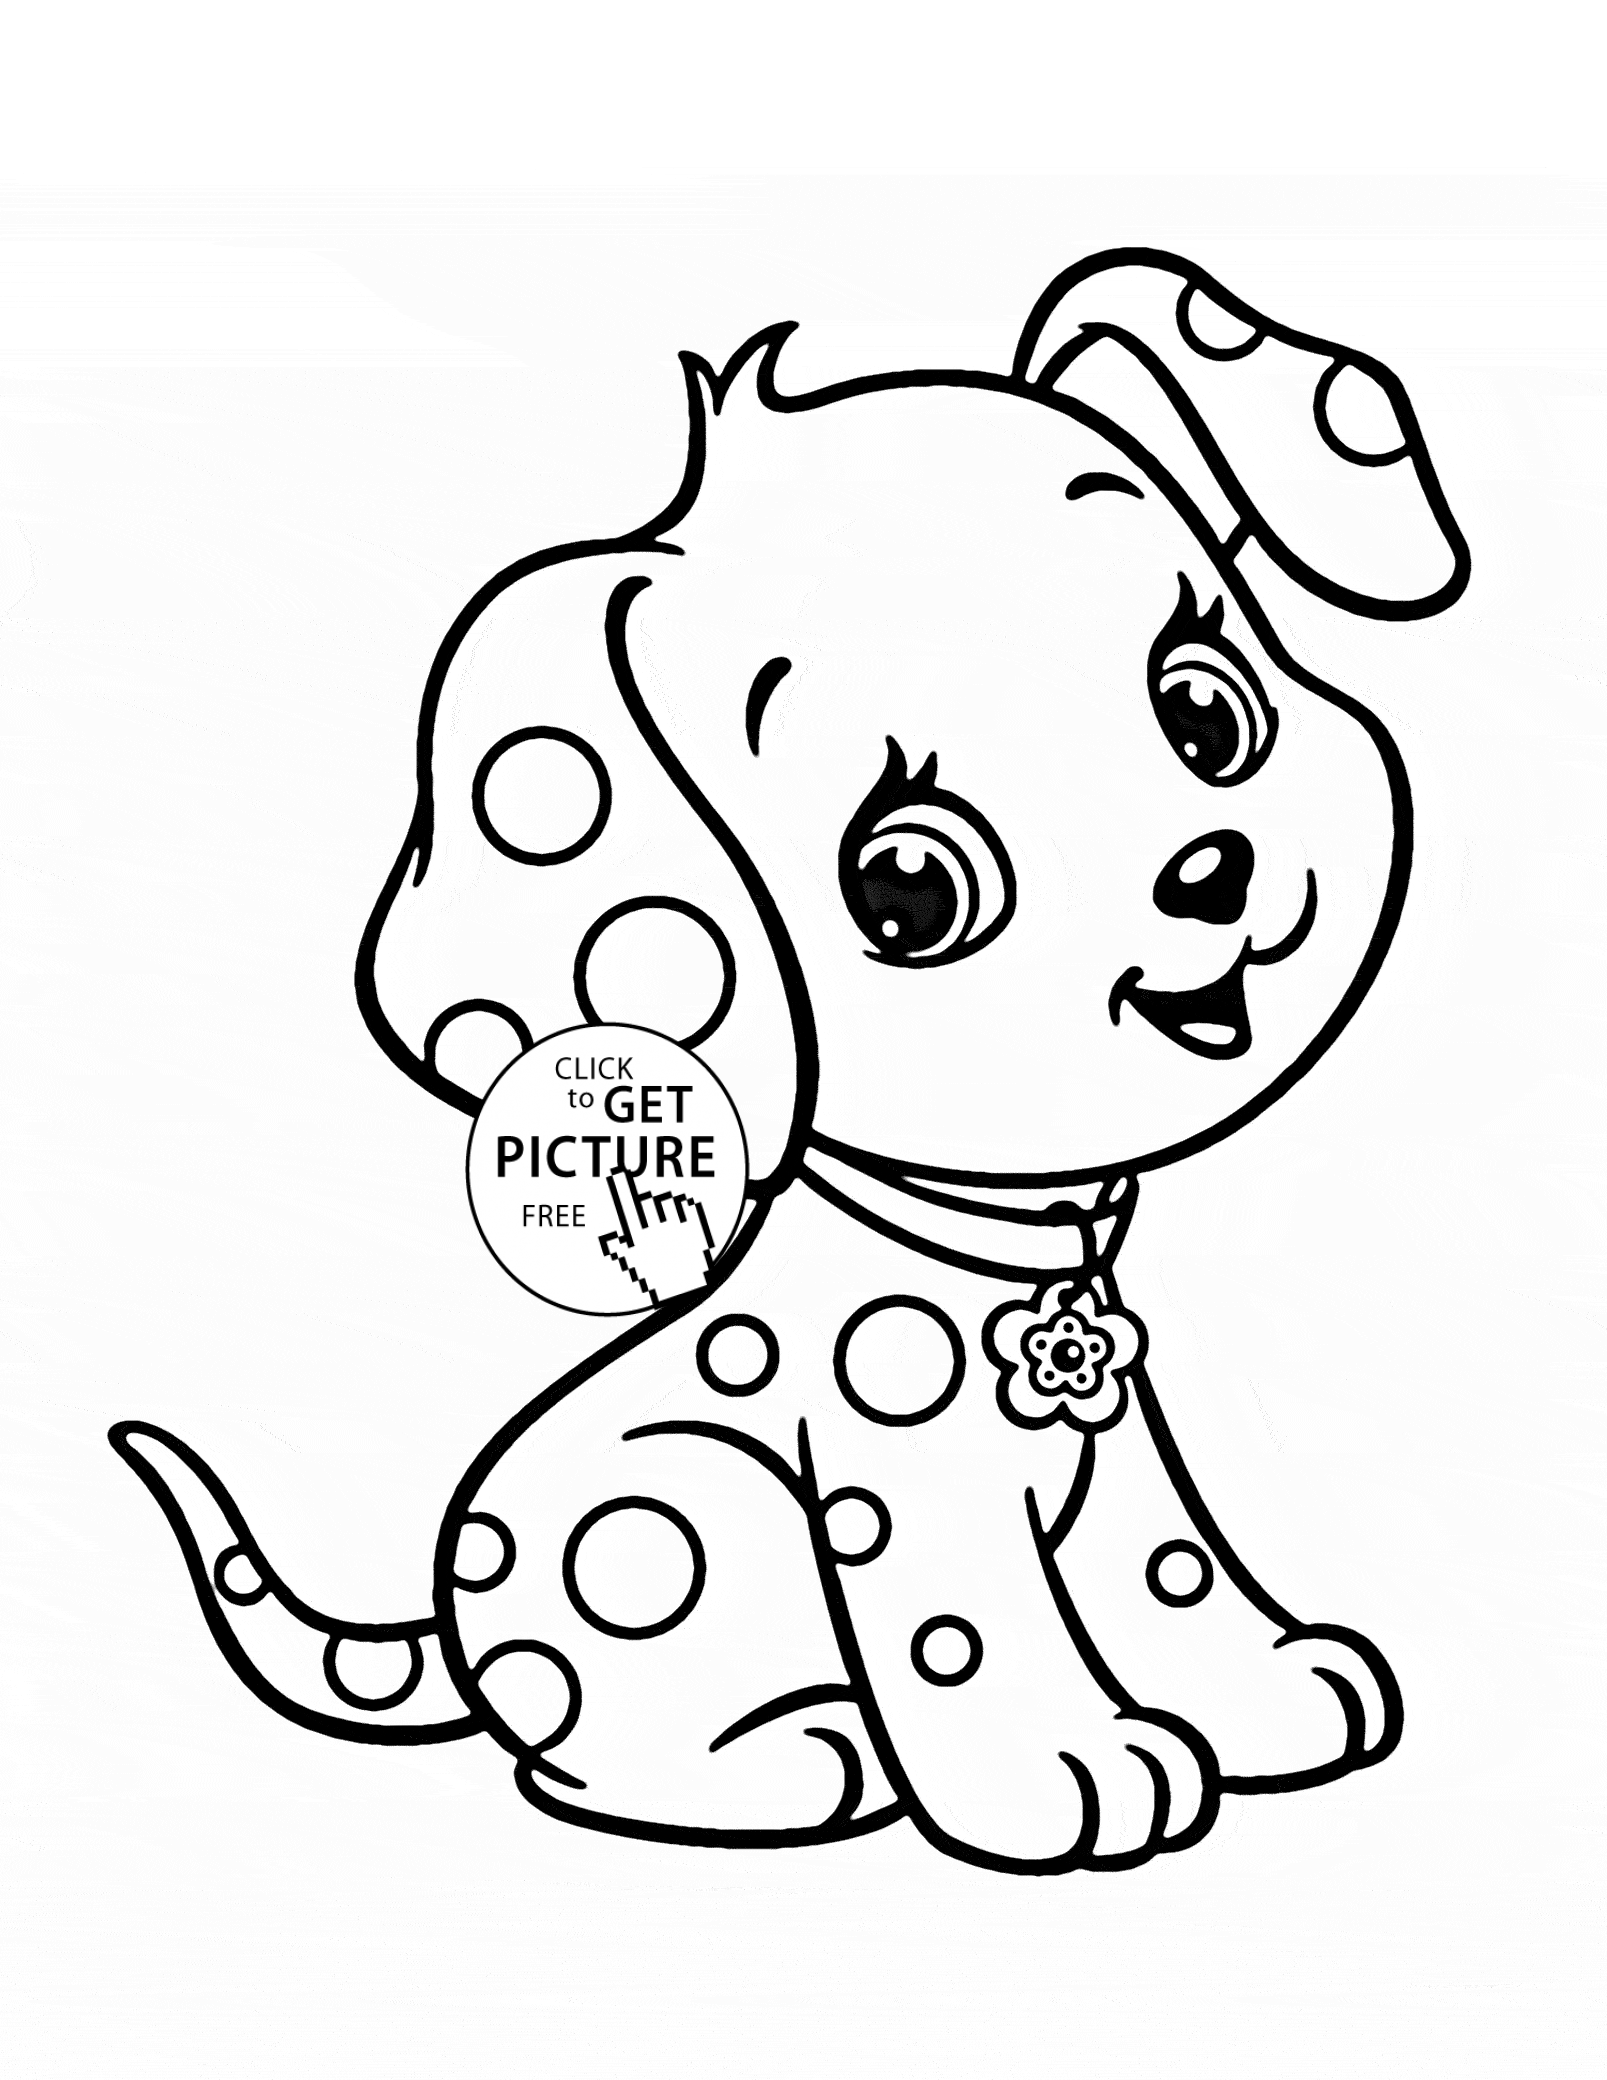 Clifford Puppy Coloring Pages - Coloring Page